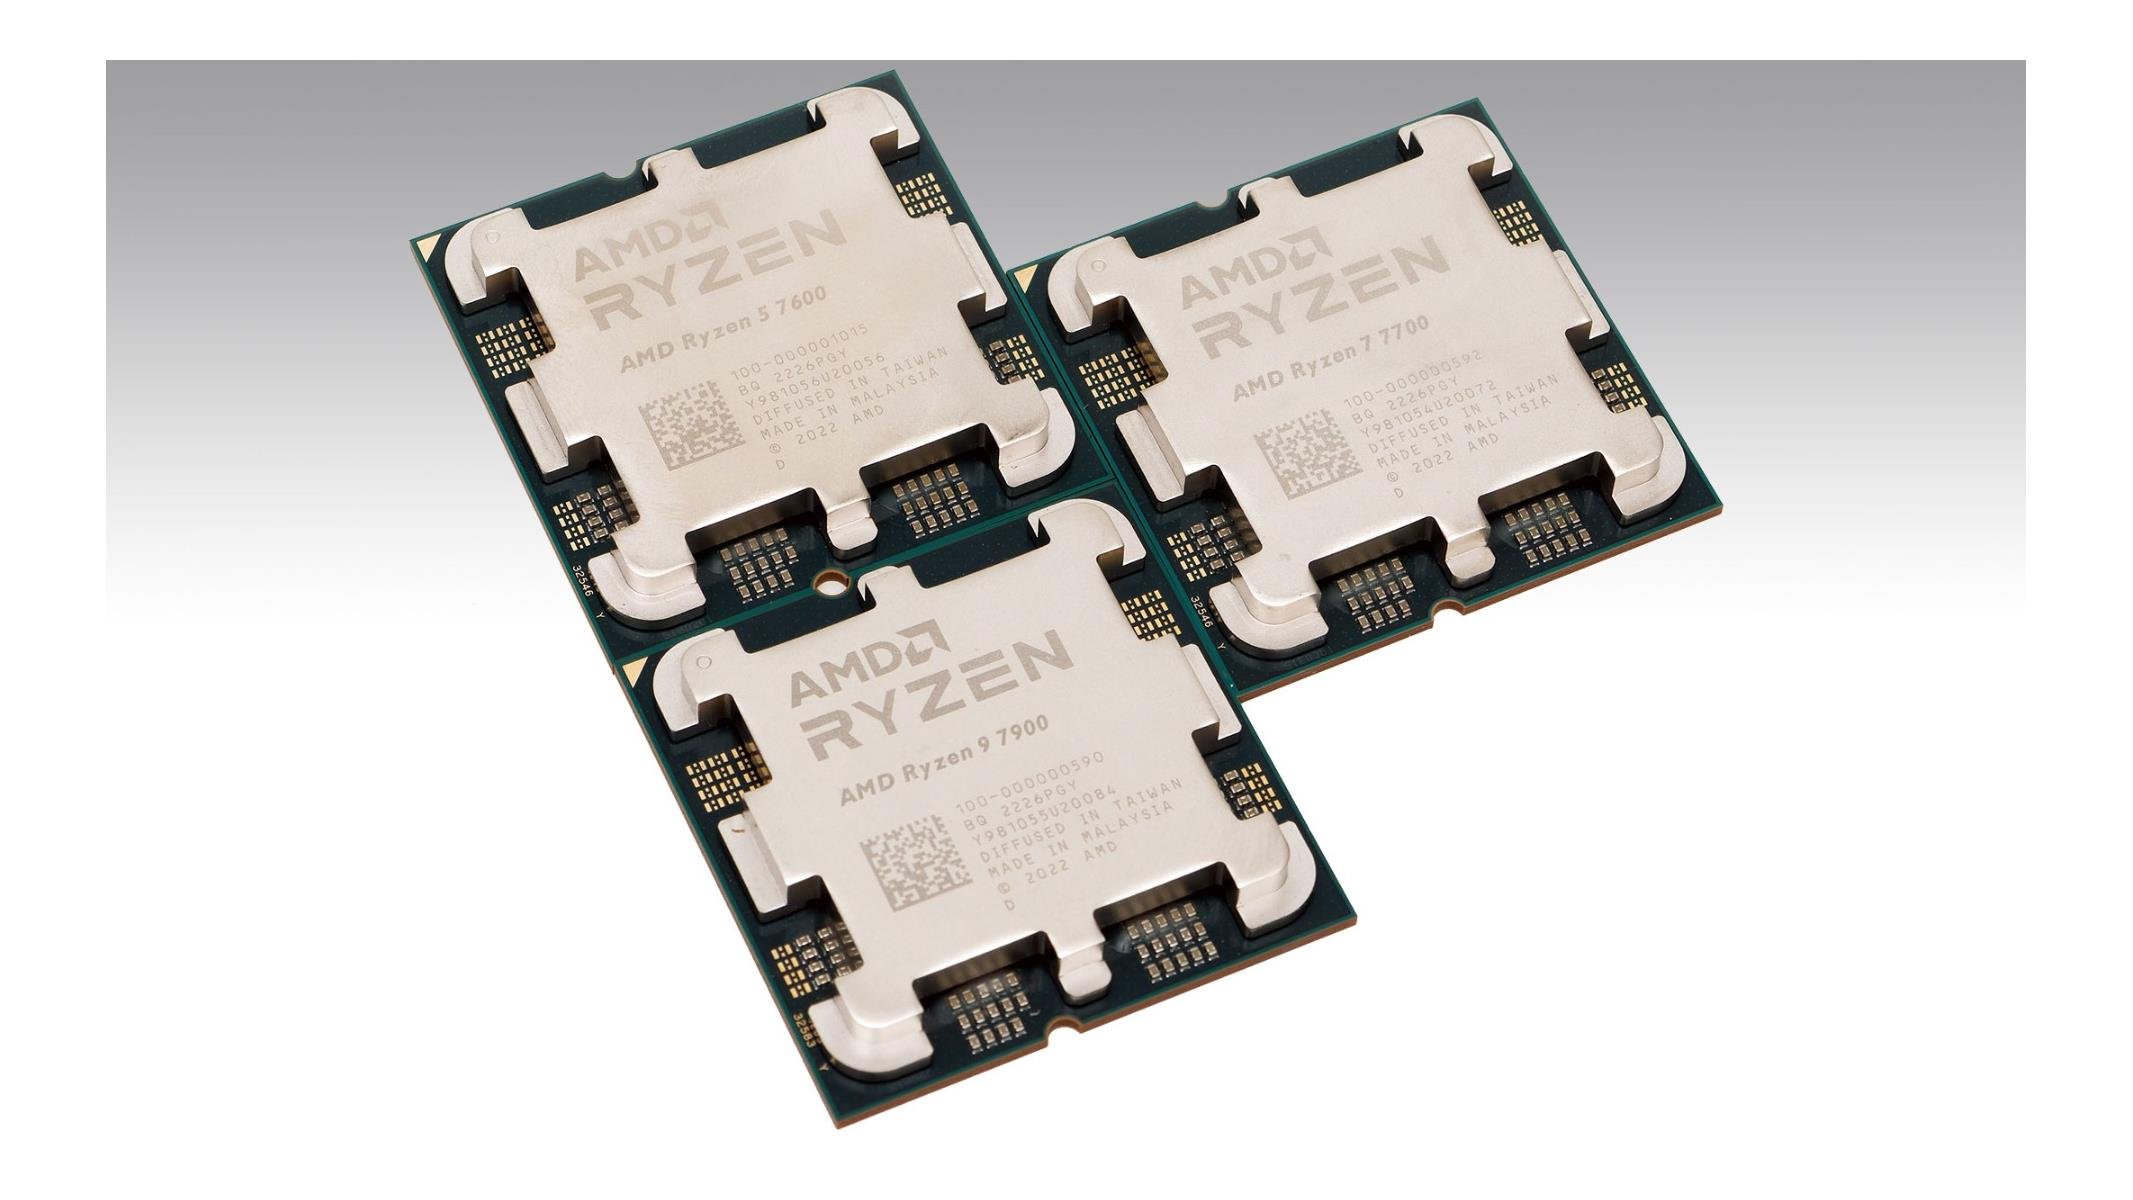 AMD Ryzen 7900 And 7700 Review: The Power Of The 65W CPUs Cometh 